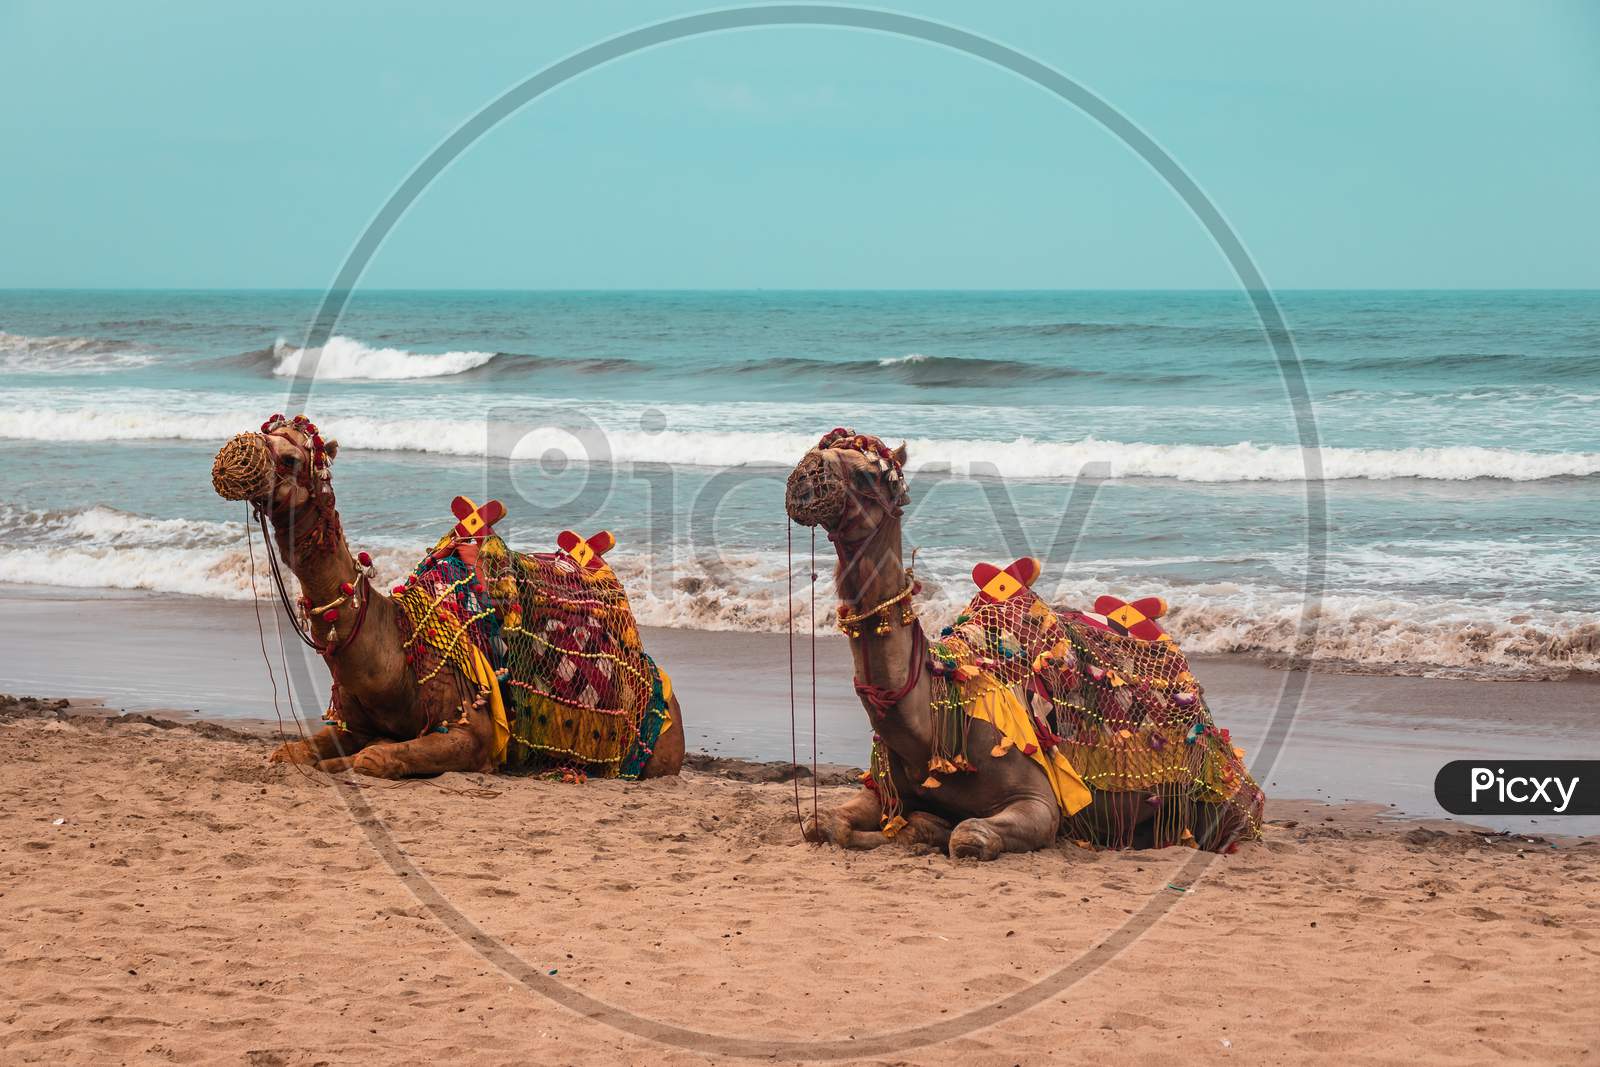 Camels on the beach